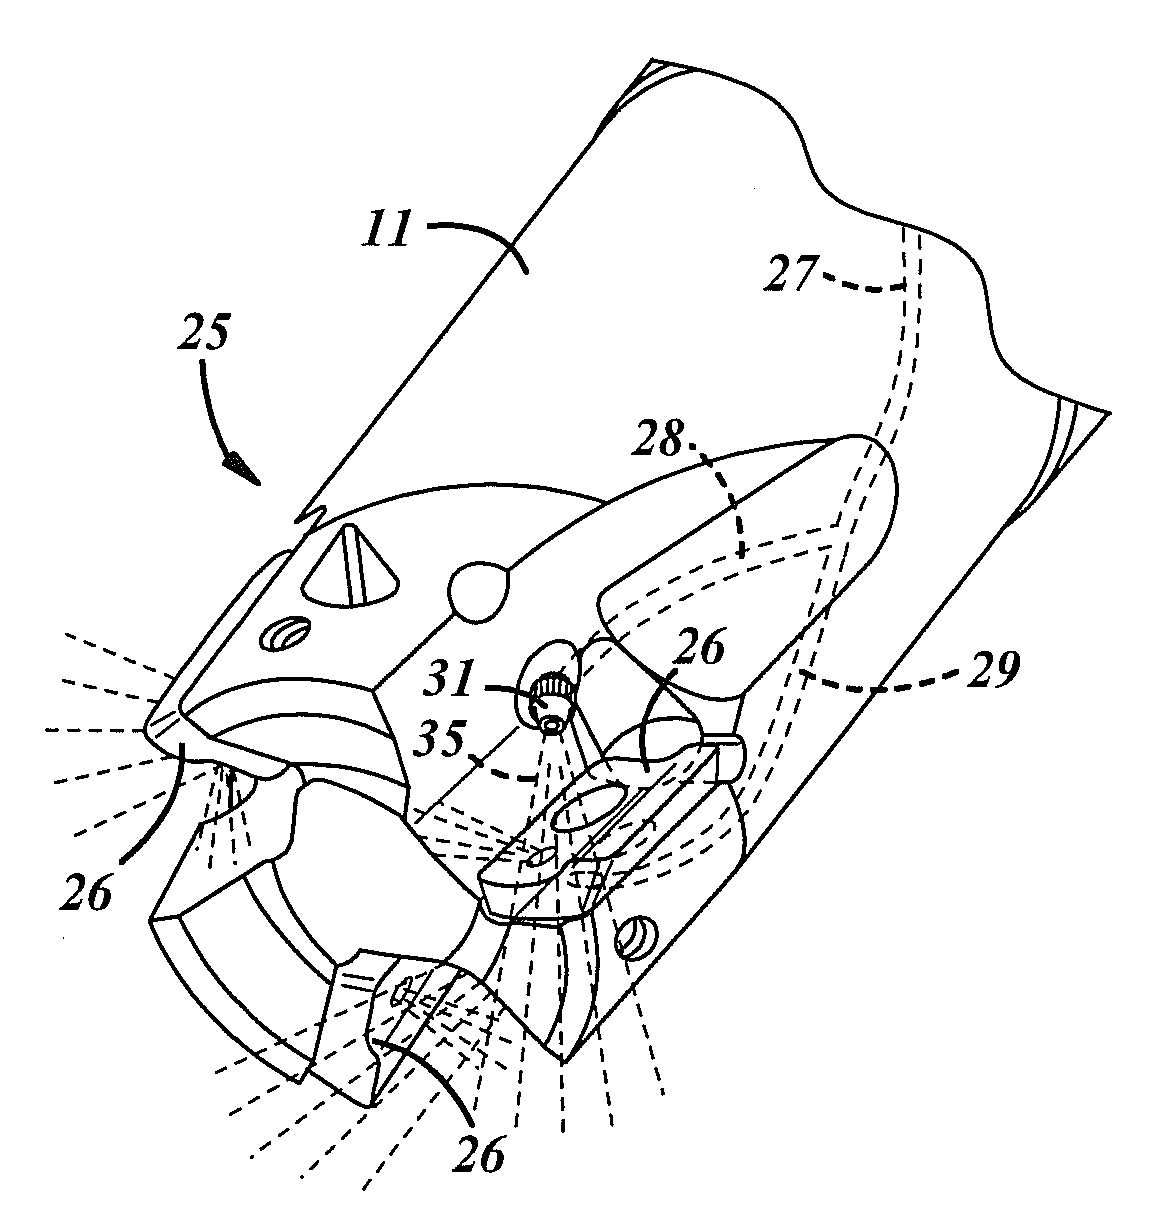 Indirect Cooling of a Rotary Cutting Tool